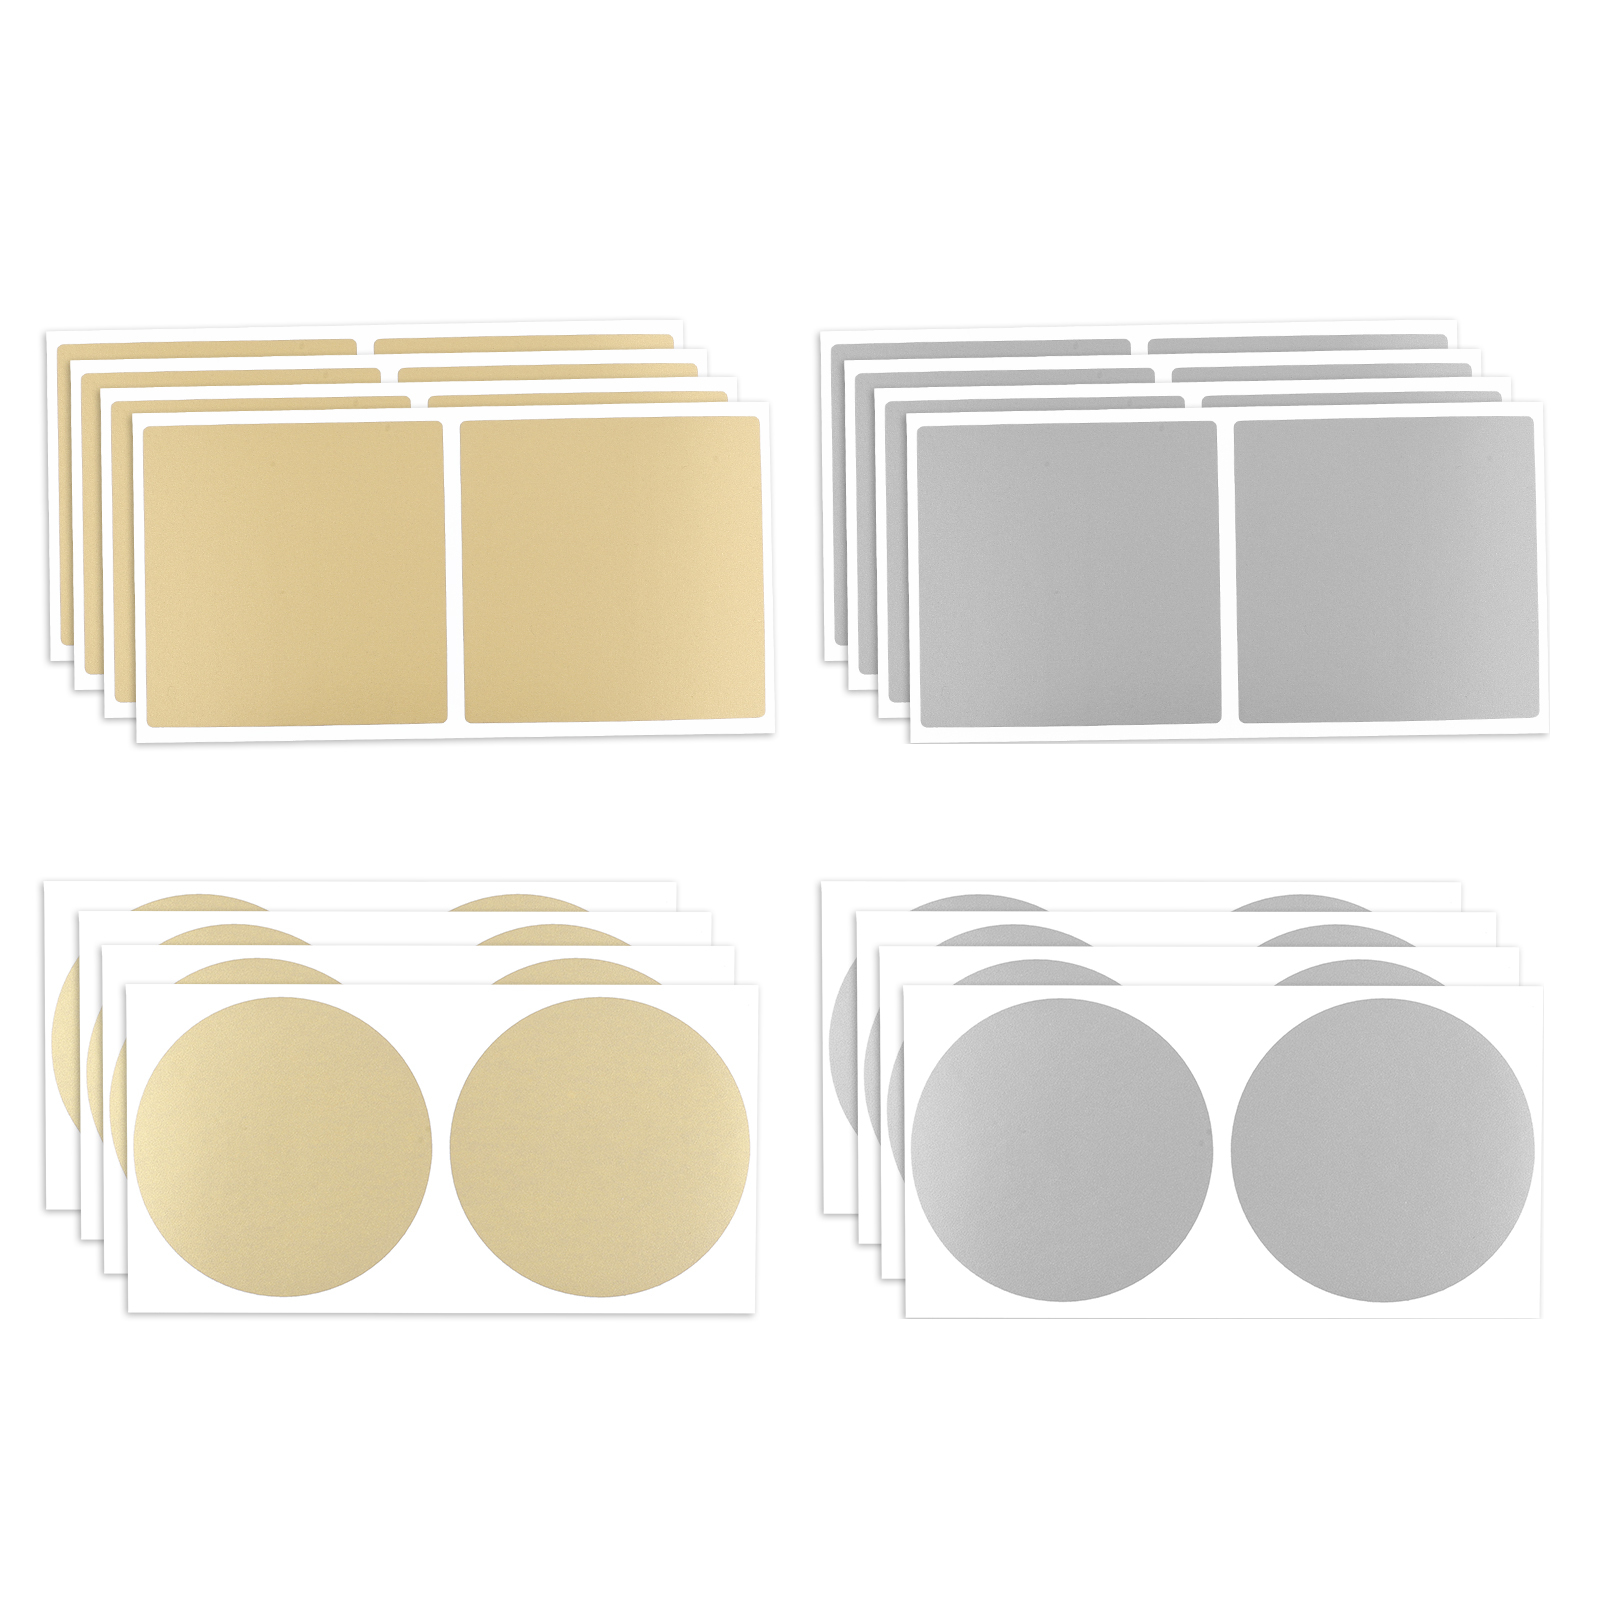  Scratch Off Sticker 2 inch Silver Square Labels for